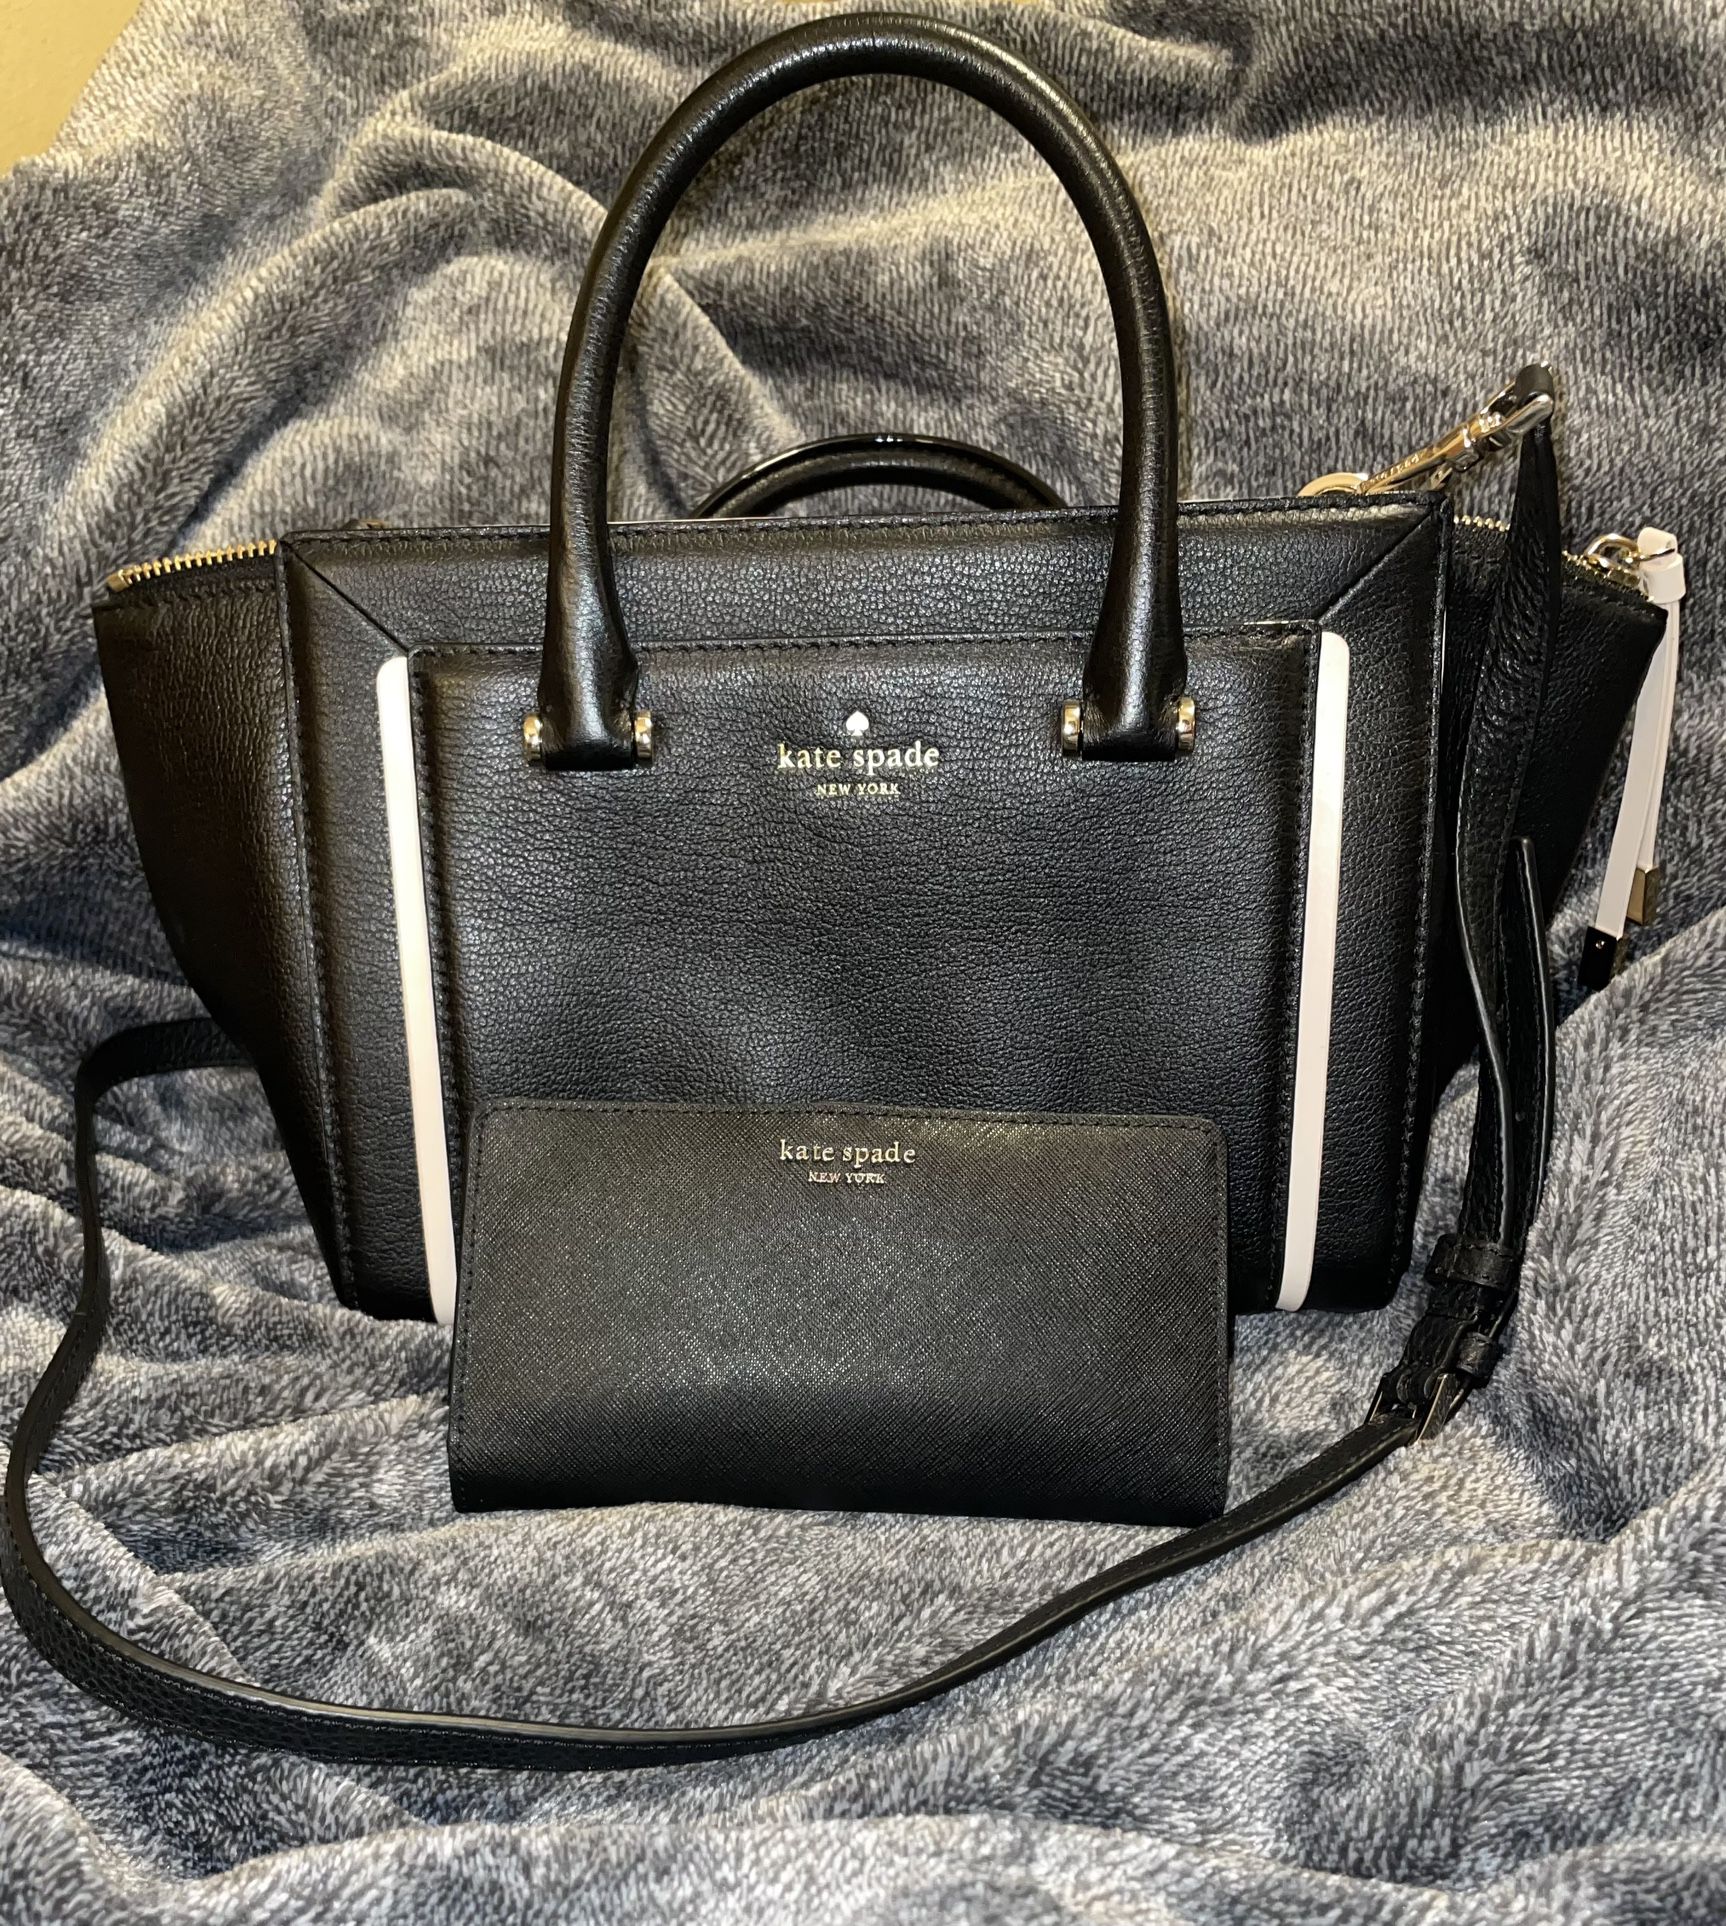 $75 Firm For Both Like New Condition Kate Spade Bag & Good Condition Wallet 